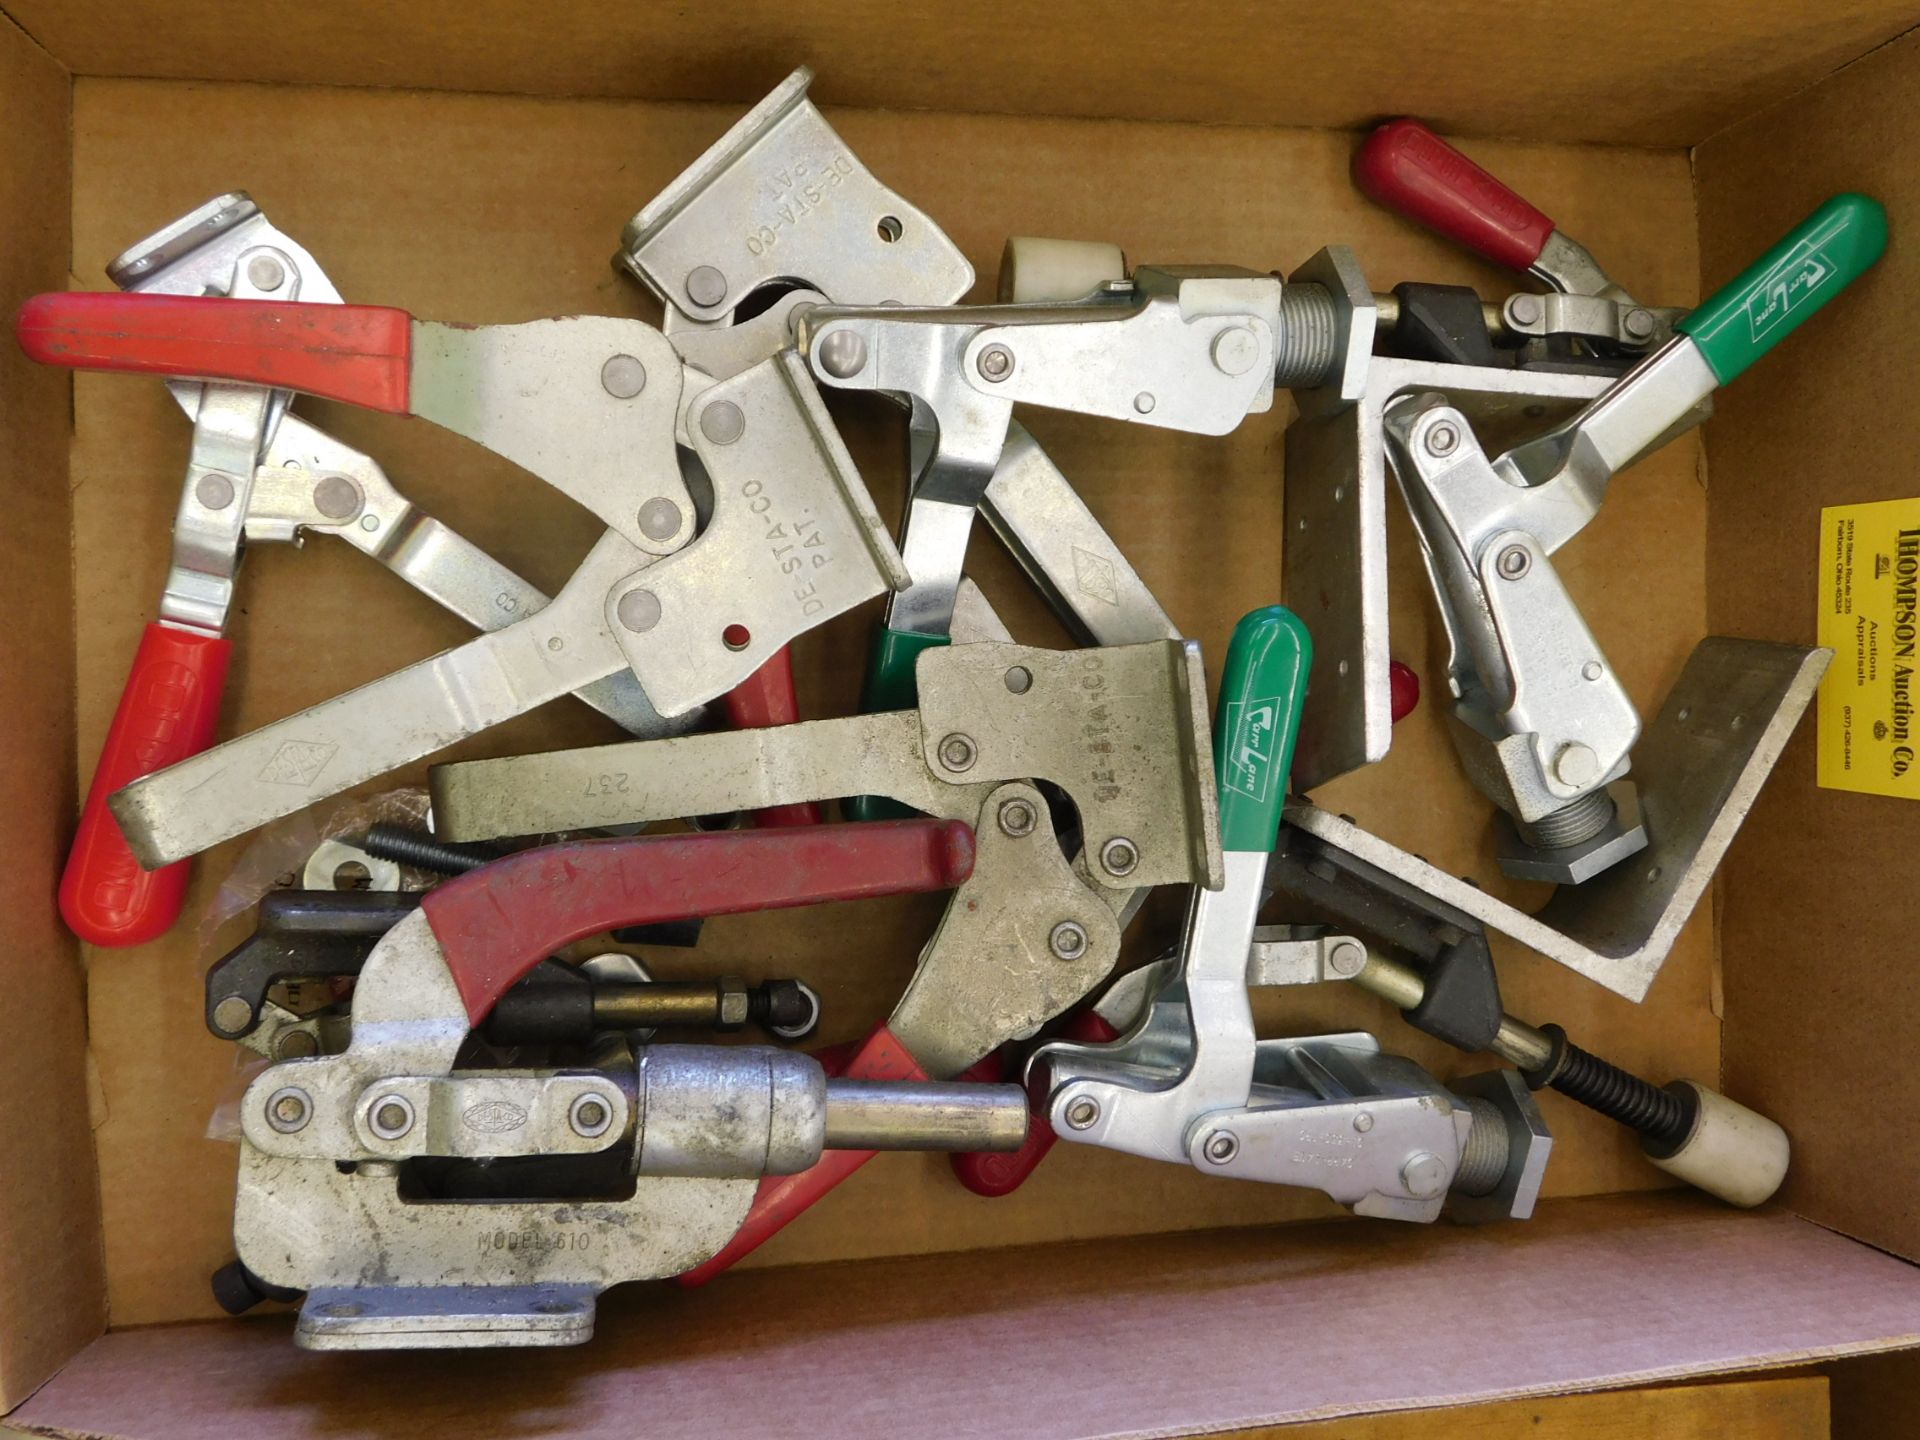 De-Sta-Co and Carr Line Clamps